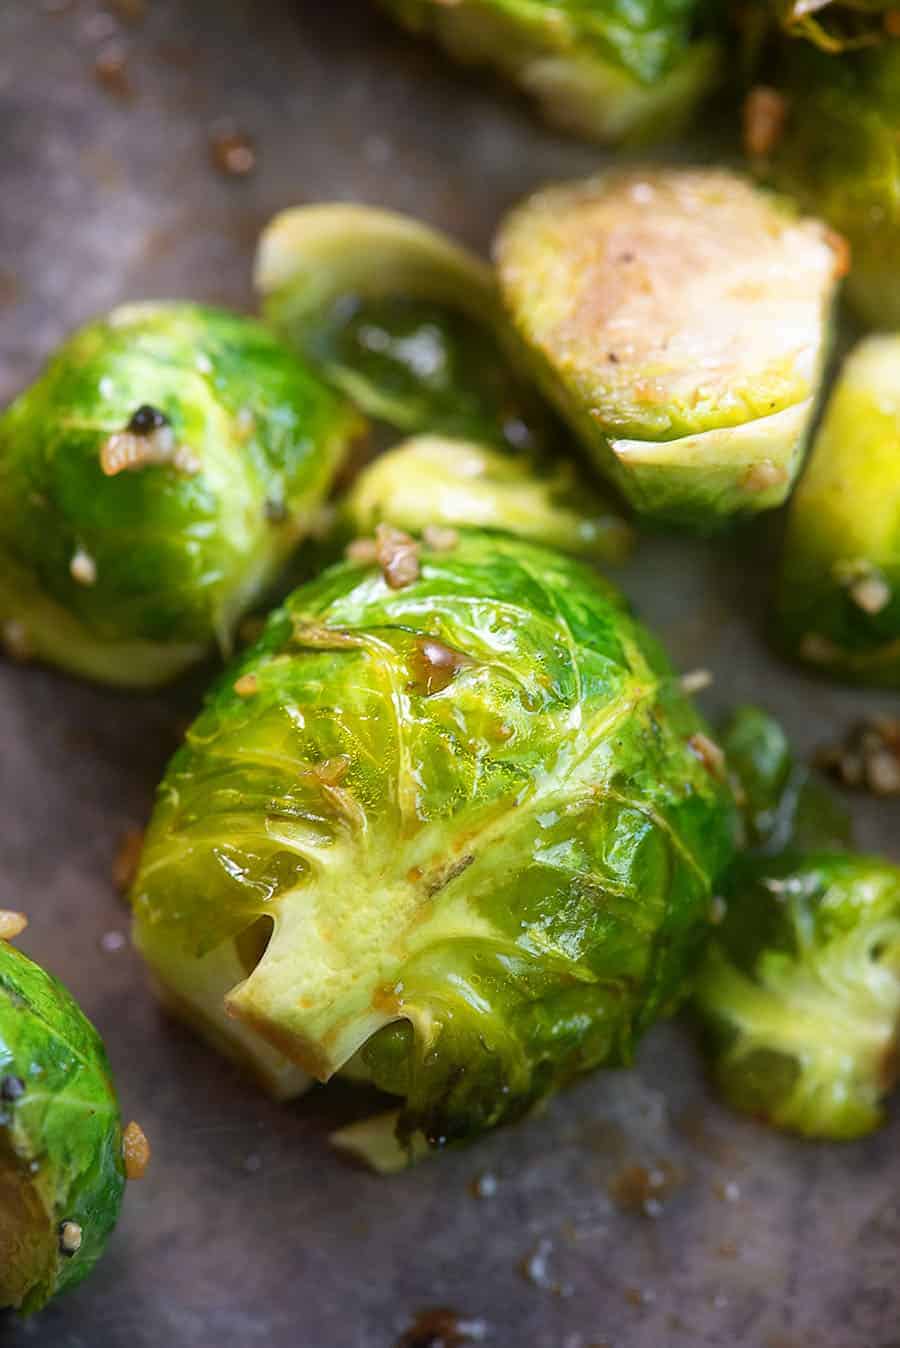 A close up of a cooked whole Brussel sprout.